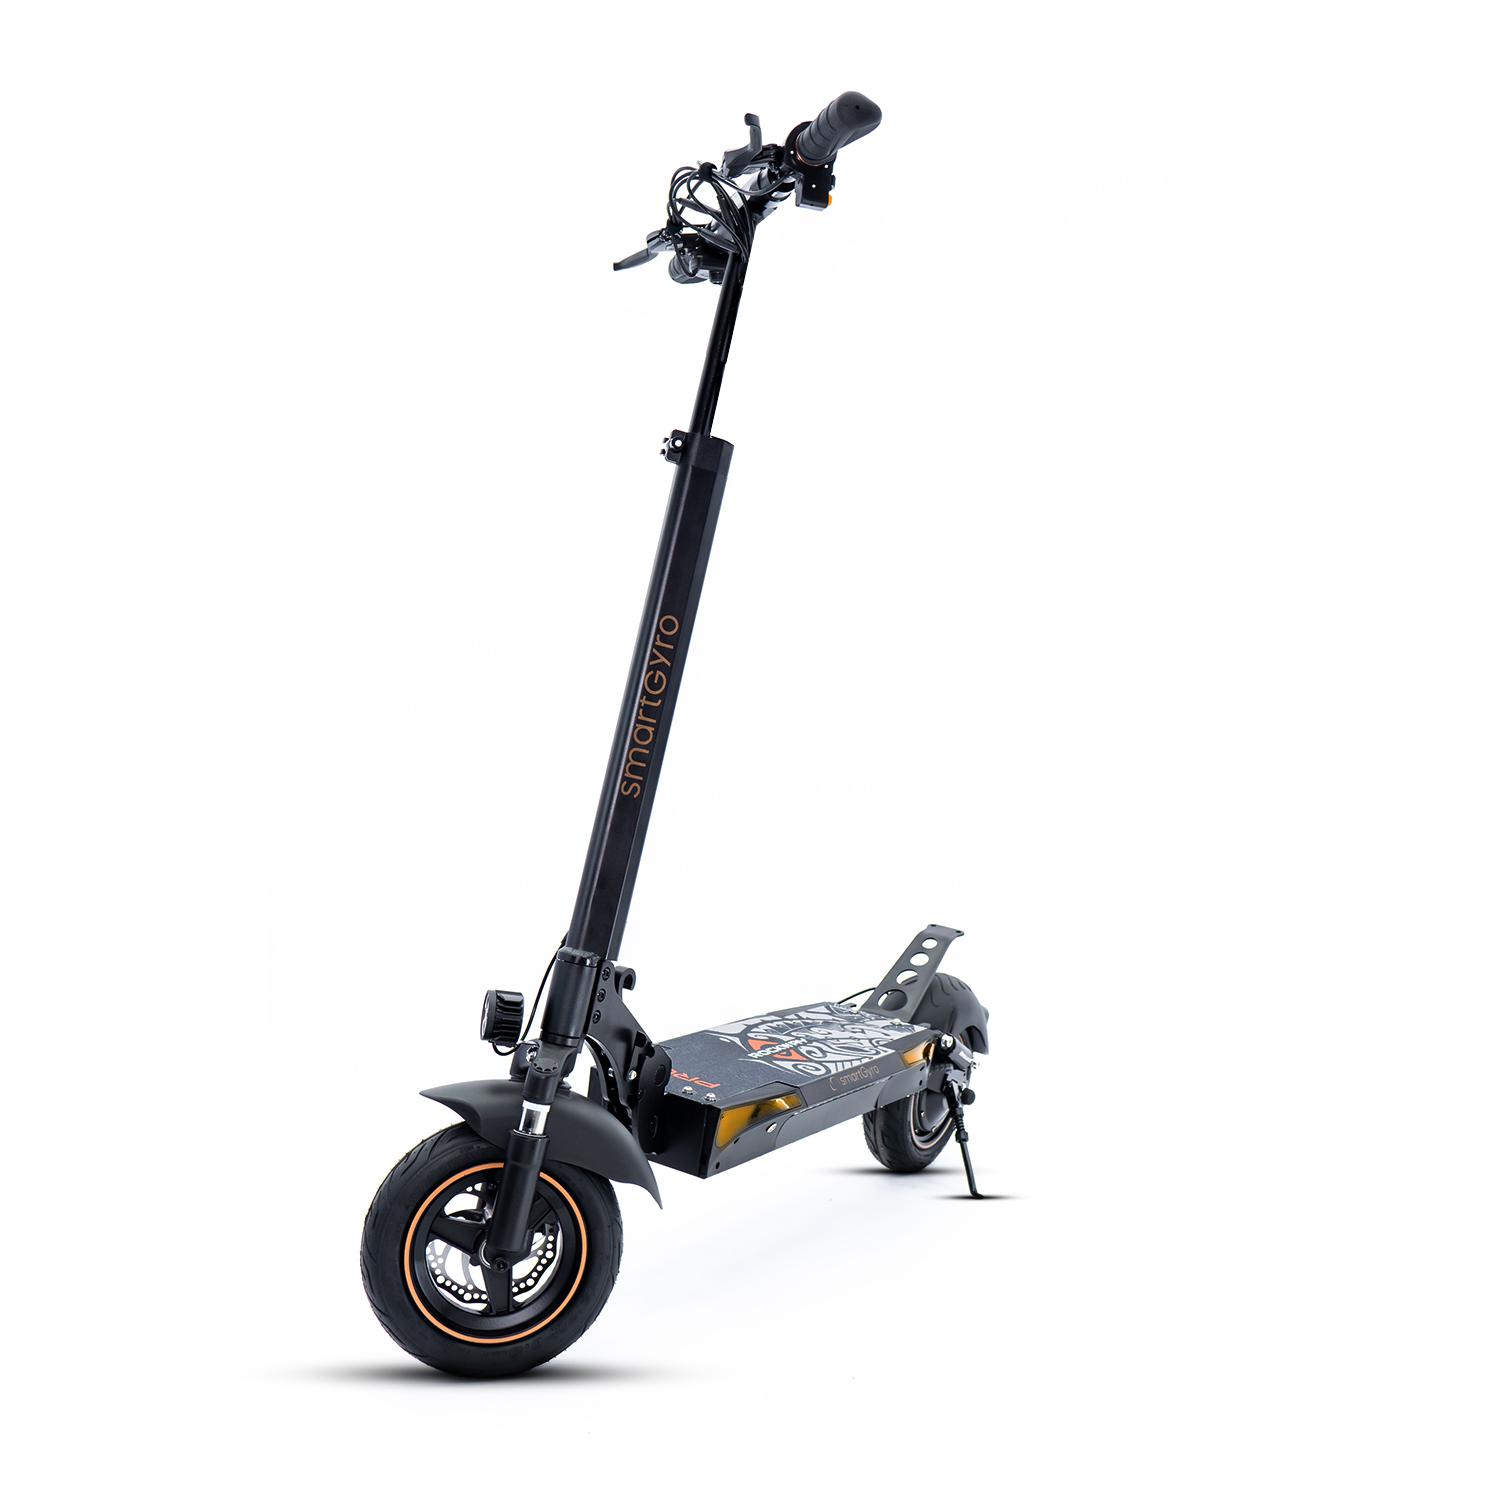 SmartGyro Rockway Electric Scooter